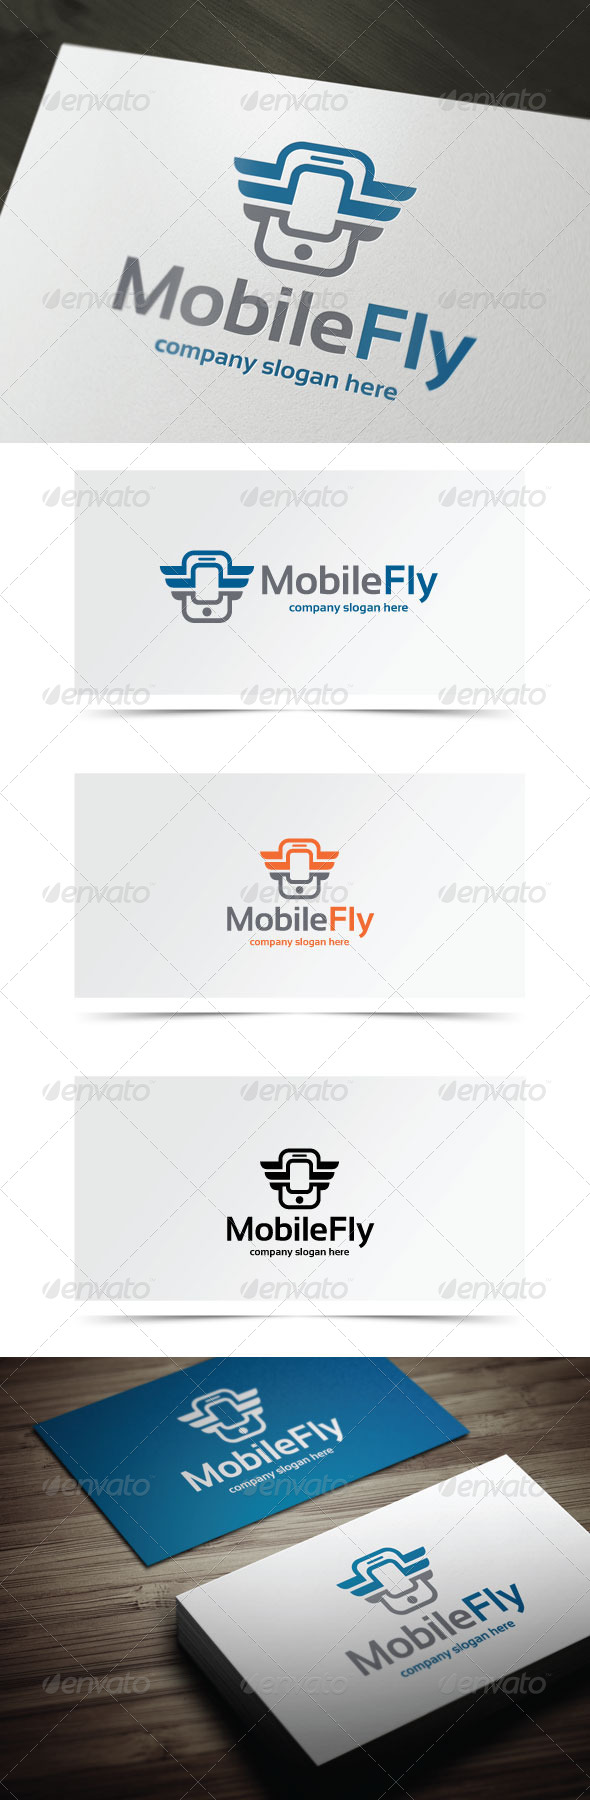 Mobile Fly